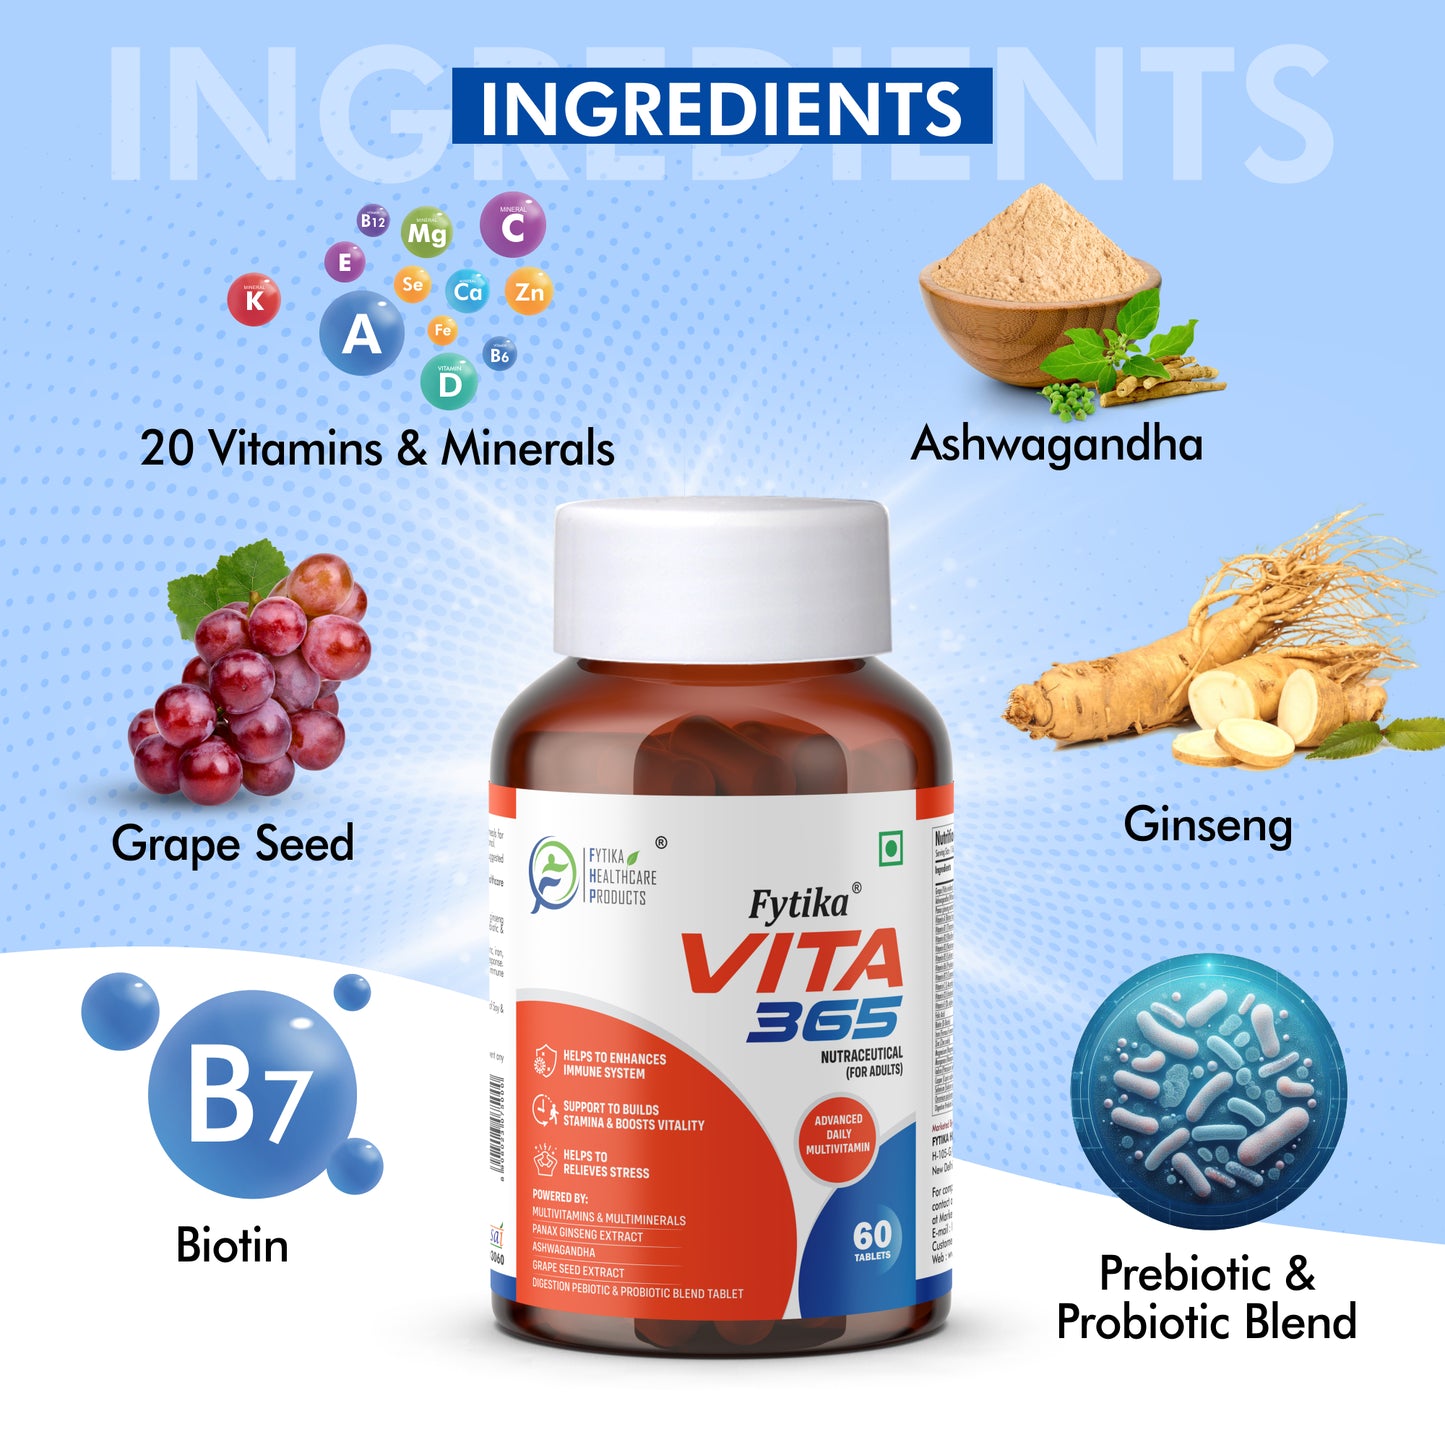 Fytika Vita 365 and Strong Bones: Boosts Energy, Immunity, Manages Stress, For  Men & Women - 60 Tablets Each